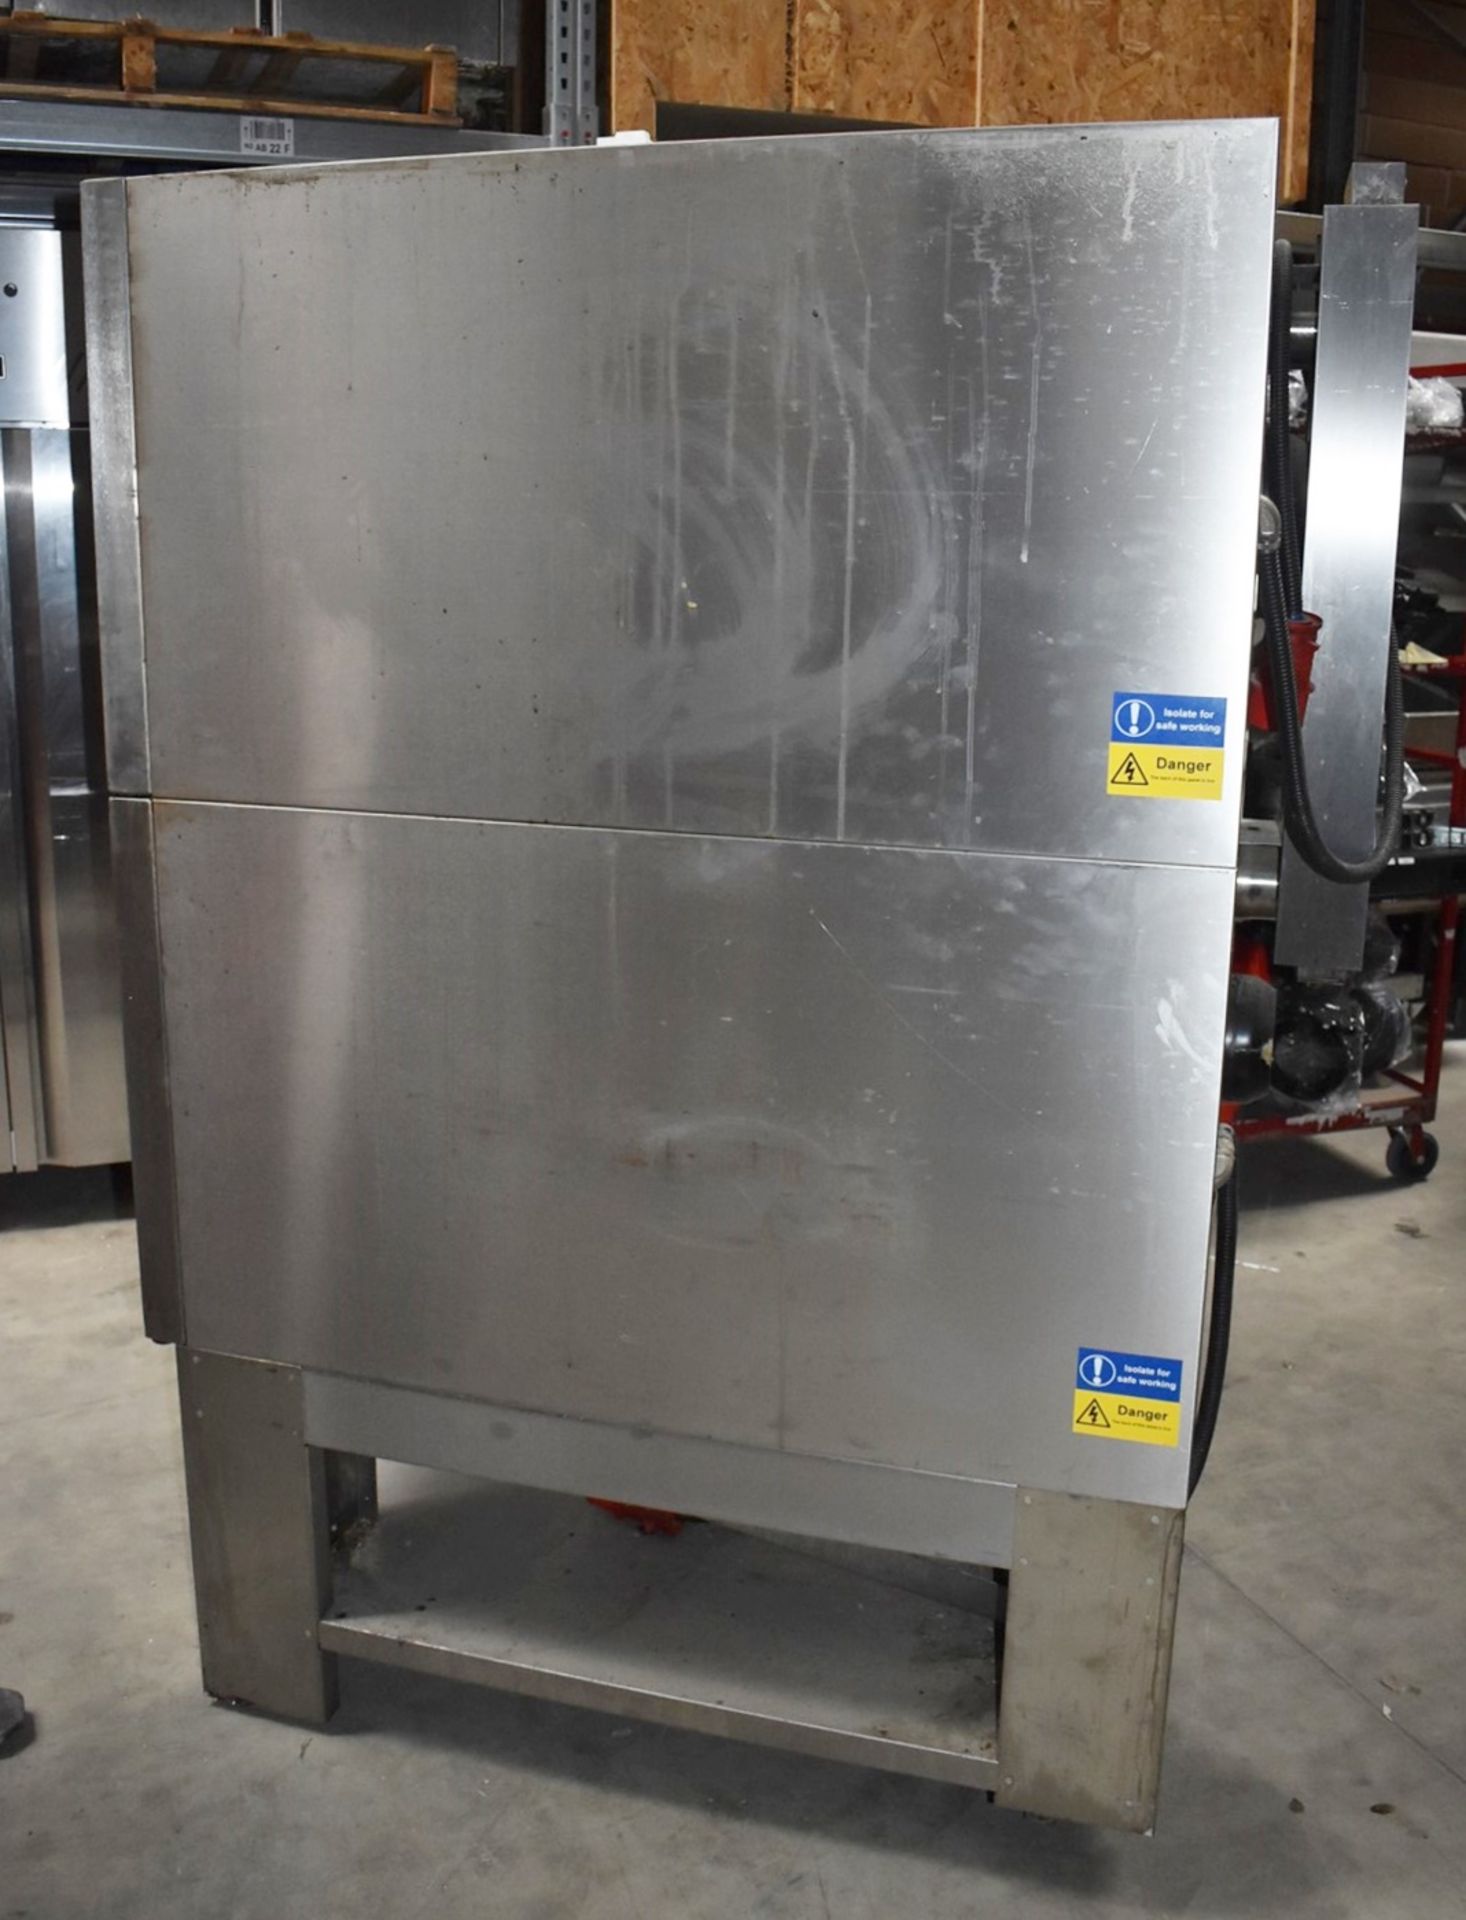 1 x Tom Chandley TC5 Double Convection Bakery Oven - Recently Removed From a Major Supermarket Store - Image 10 of 14